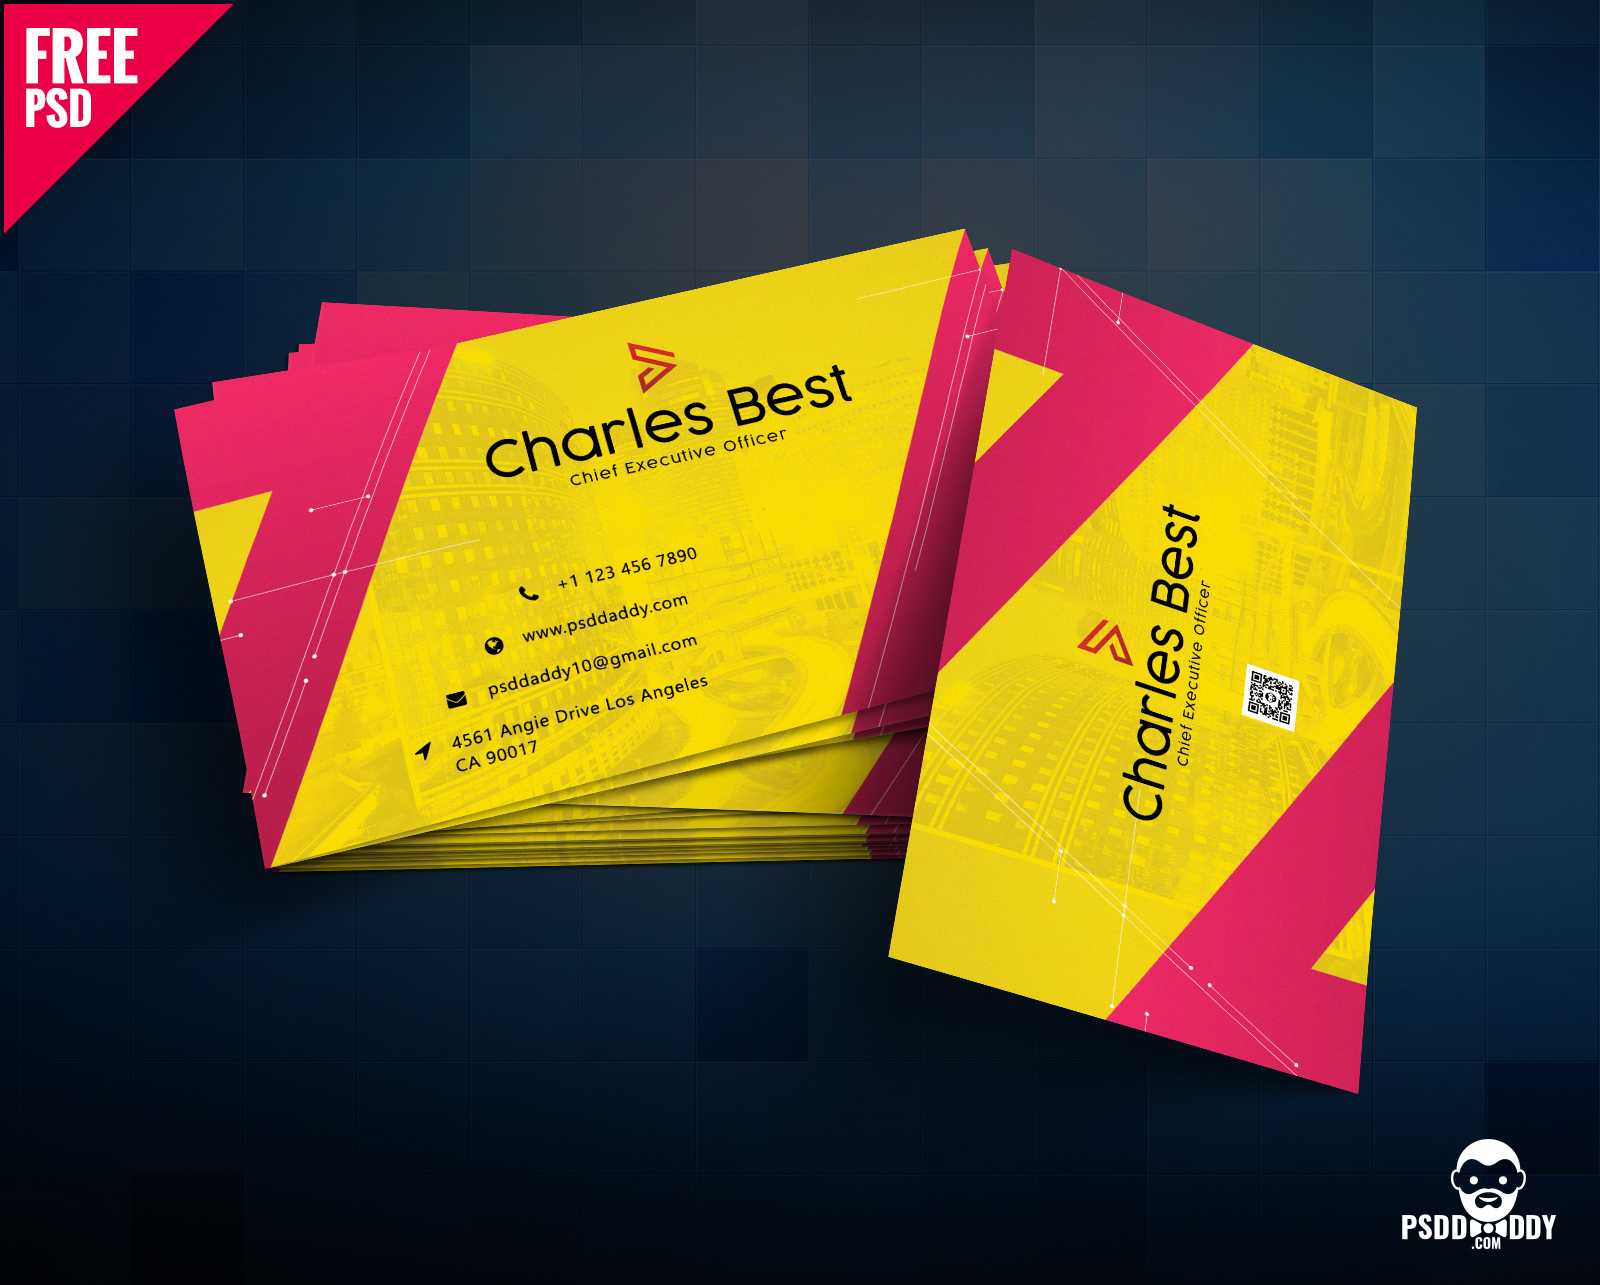 Download] Creative Business Card Free Psd | Psddaddy In Template Name Card Psd